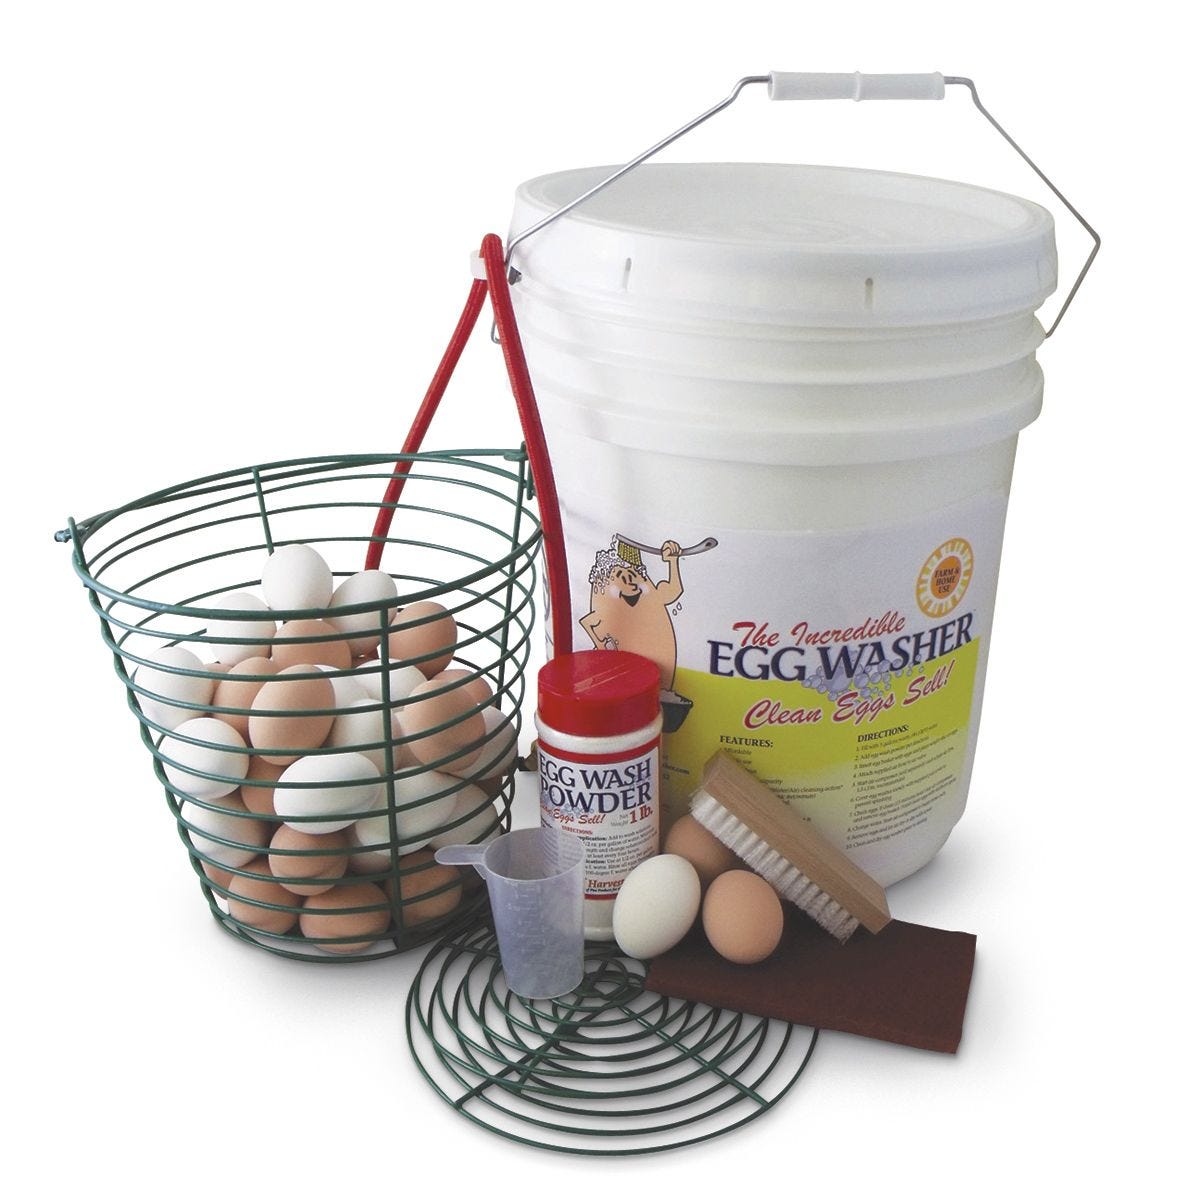 Discover This Egg Washer Machine That Cleans A Dozen Eggs A Minute.  Backyard Egg Farmers Can Save Valuable Time with this Egg Cl…